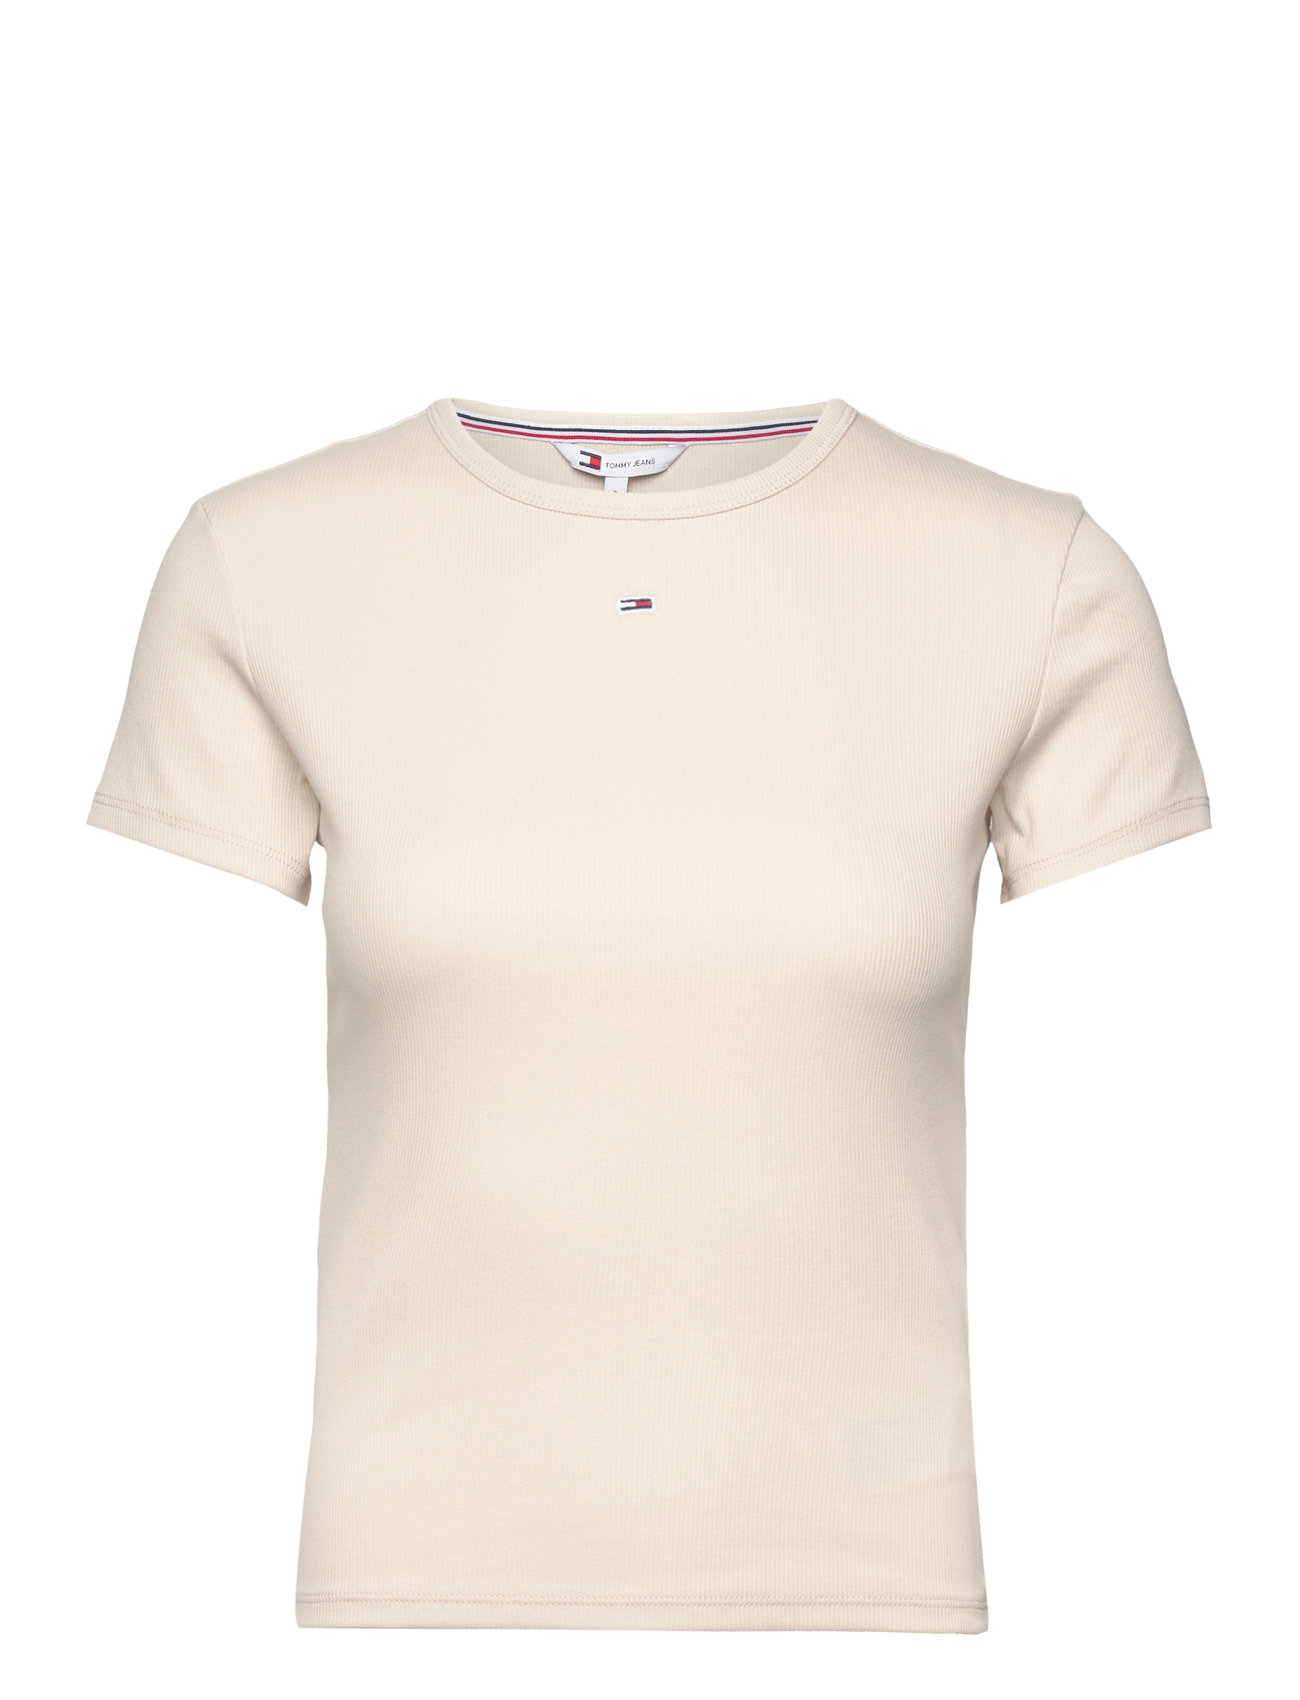 Tjw Slim Essential Rib Ss Ext Tops T-shirts & Tops Short-sleeved Beige Tommy Jeans